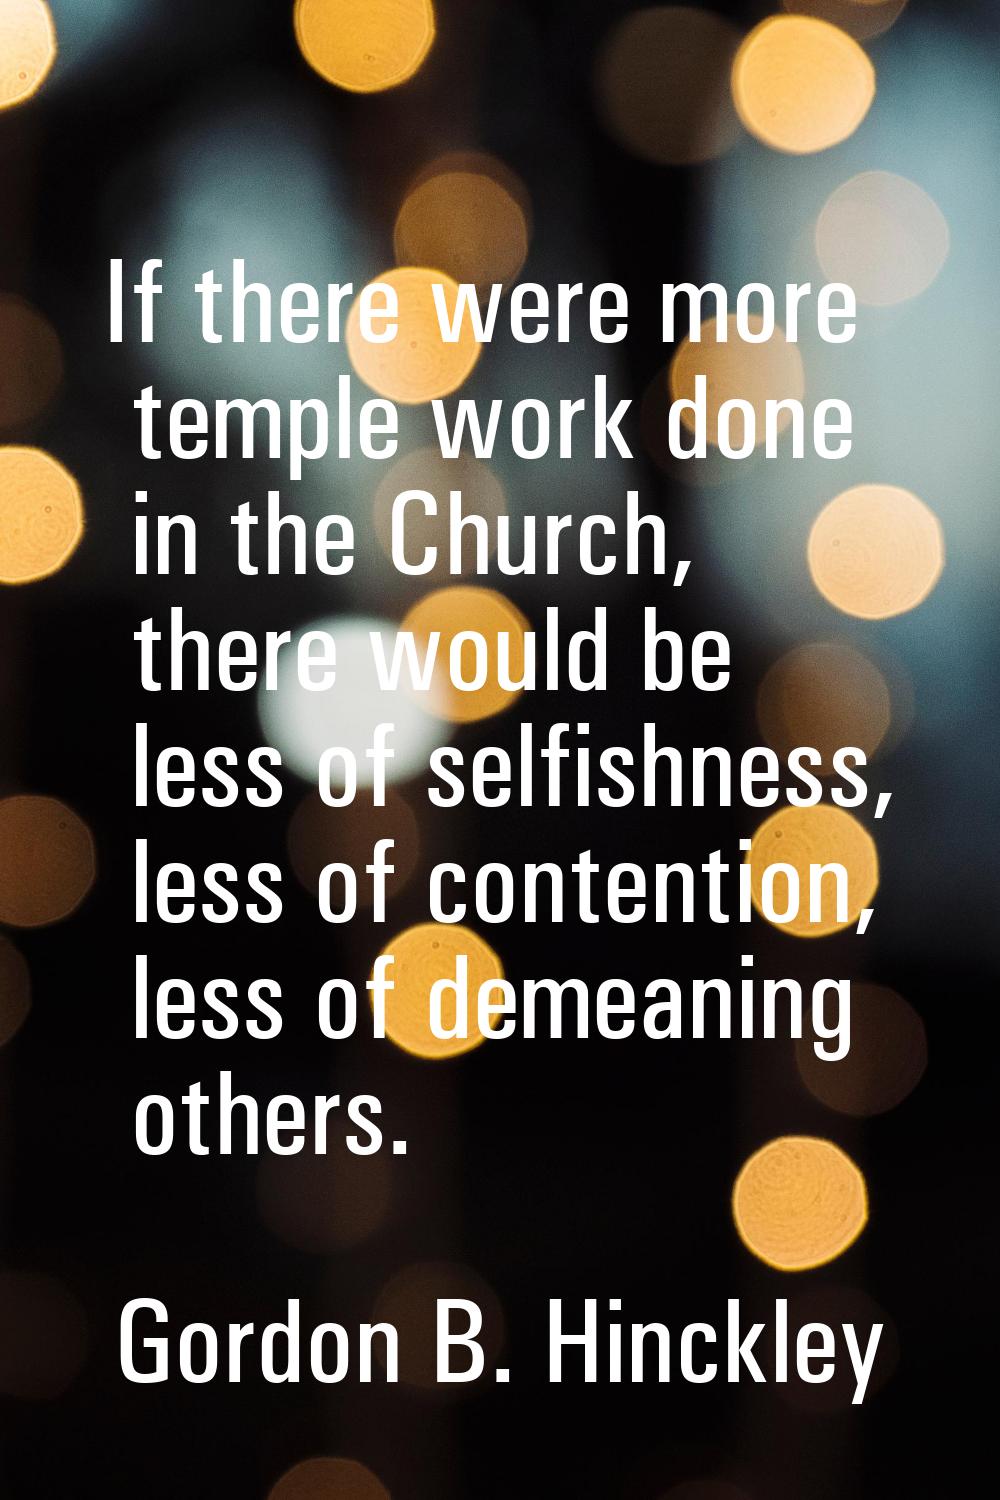 If there were more temple work done in the Church, there would be less of selfishness, less of cont